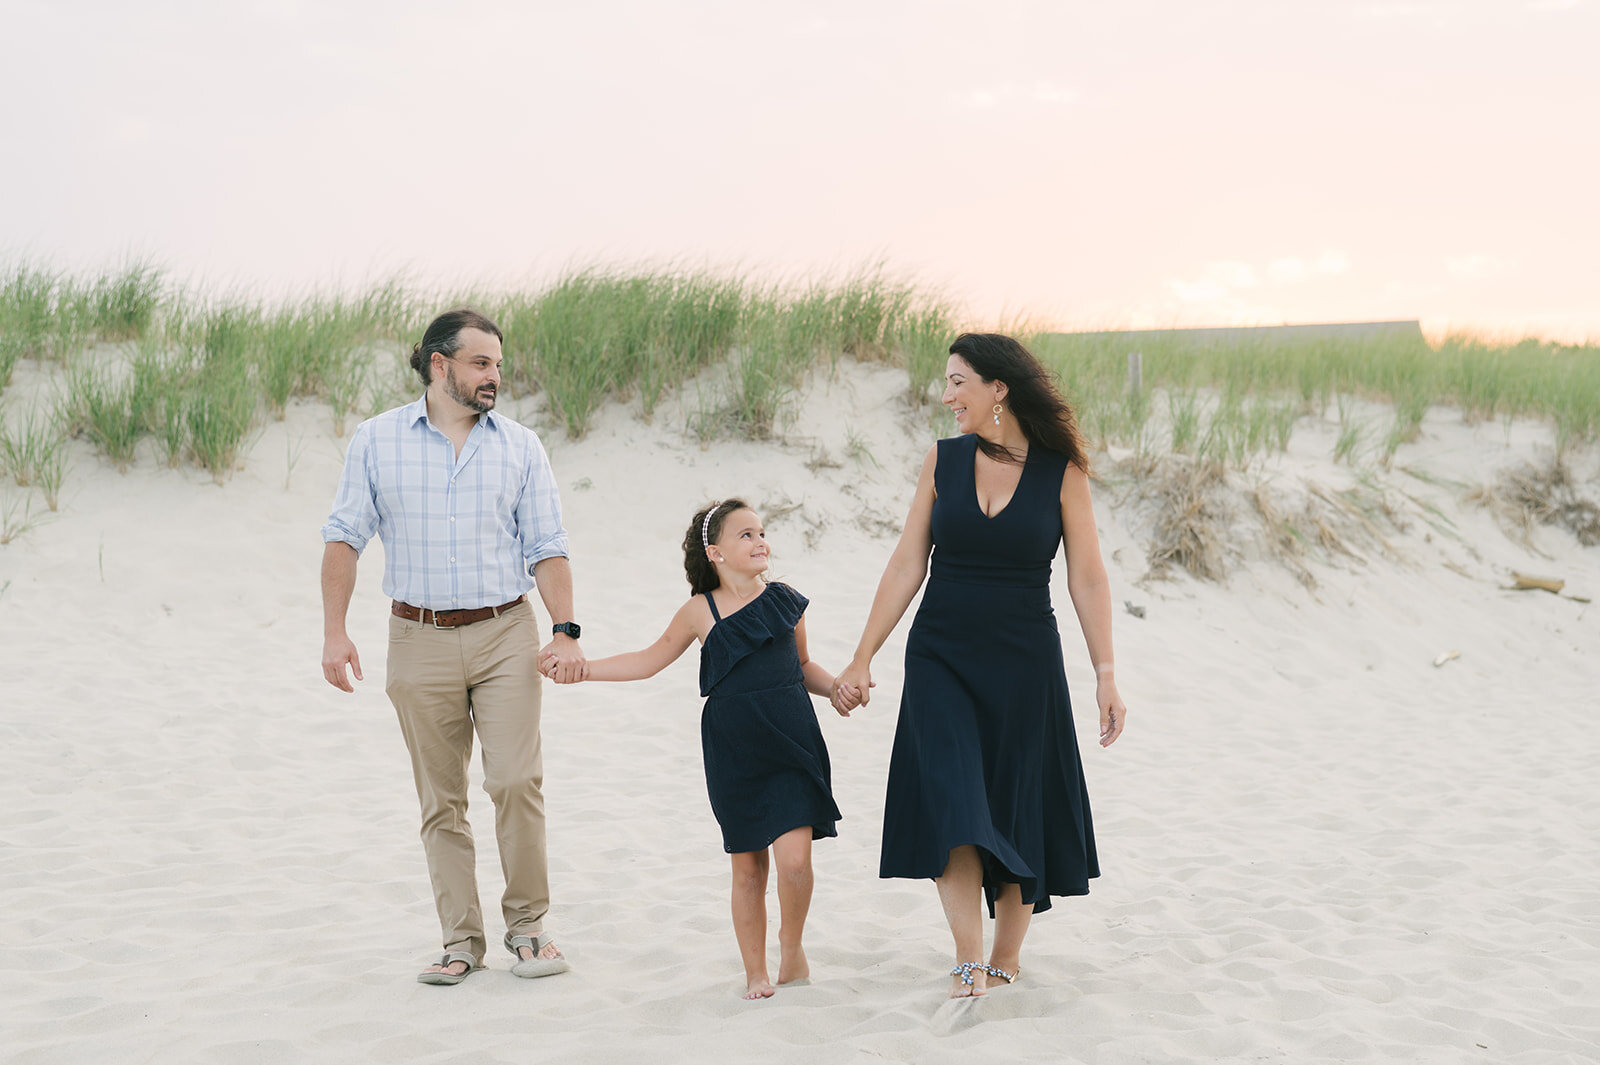 Mom, dad, and daughter holding hands and walking on beach during photos  | NKB Photo